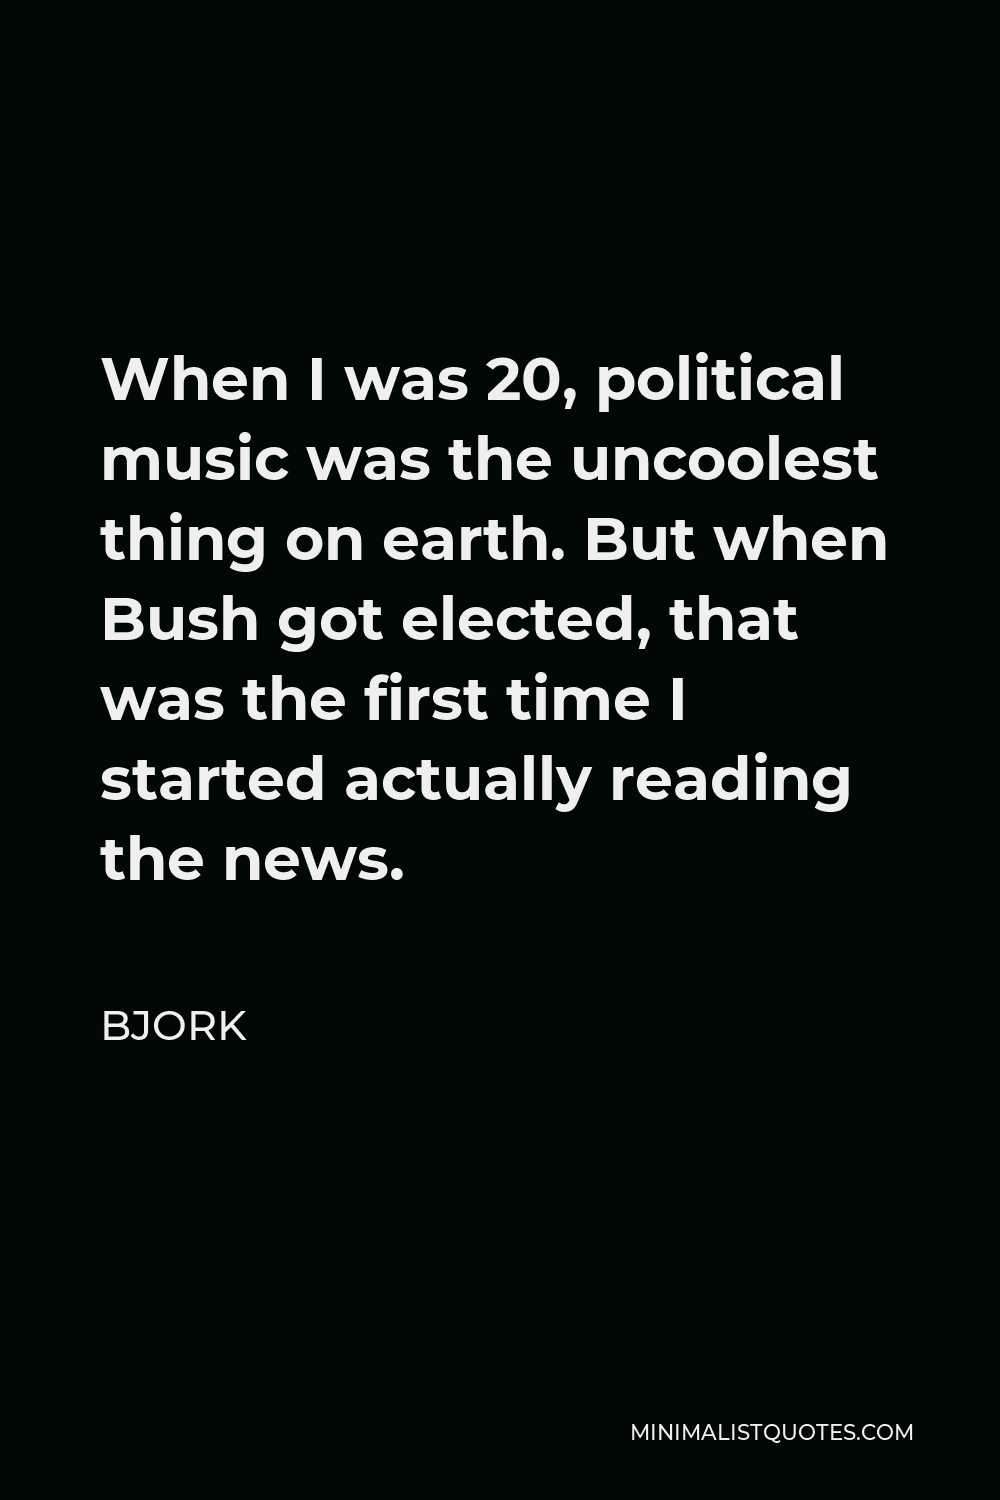 Bjork Quote - When I was 20, political music was the uncoolest thing on earth. But when Bush got elected, that was the first time I started actually reading the news.